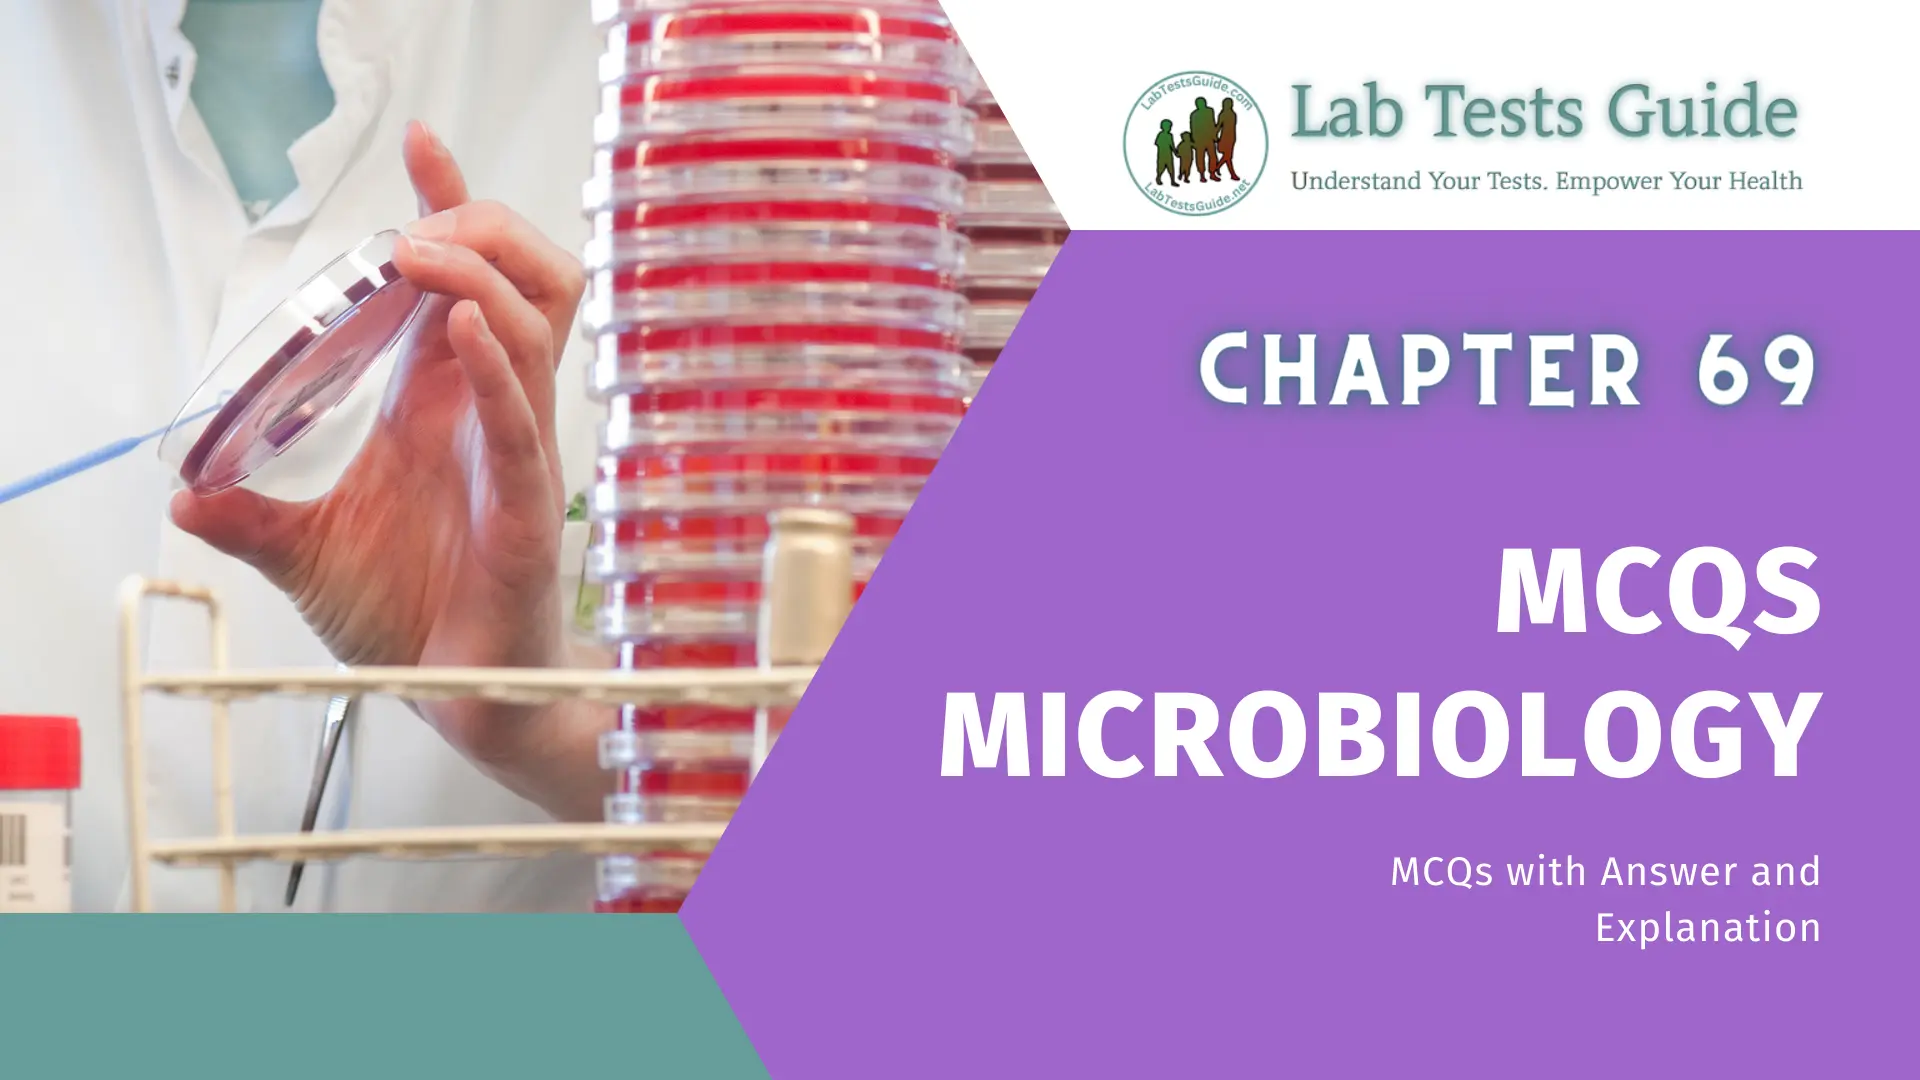 Microbiology MCQs Chapter 69